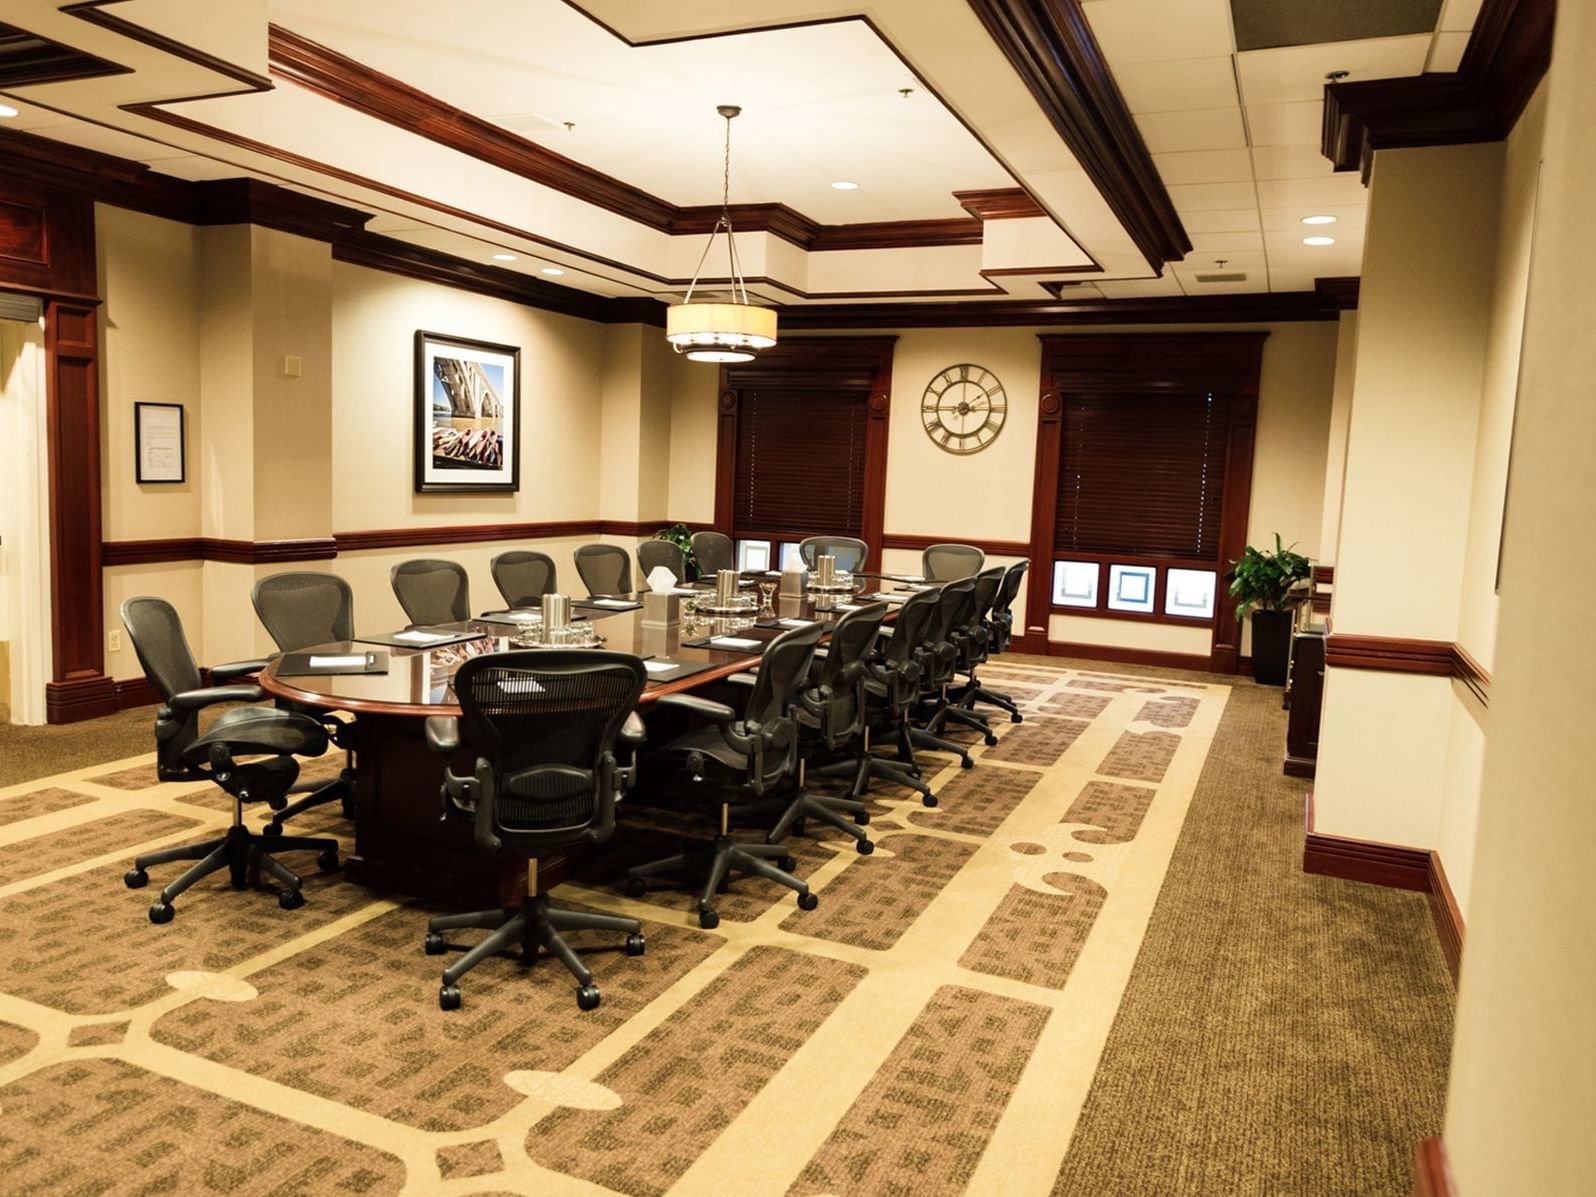 conference table in spacious room with carpet